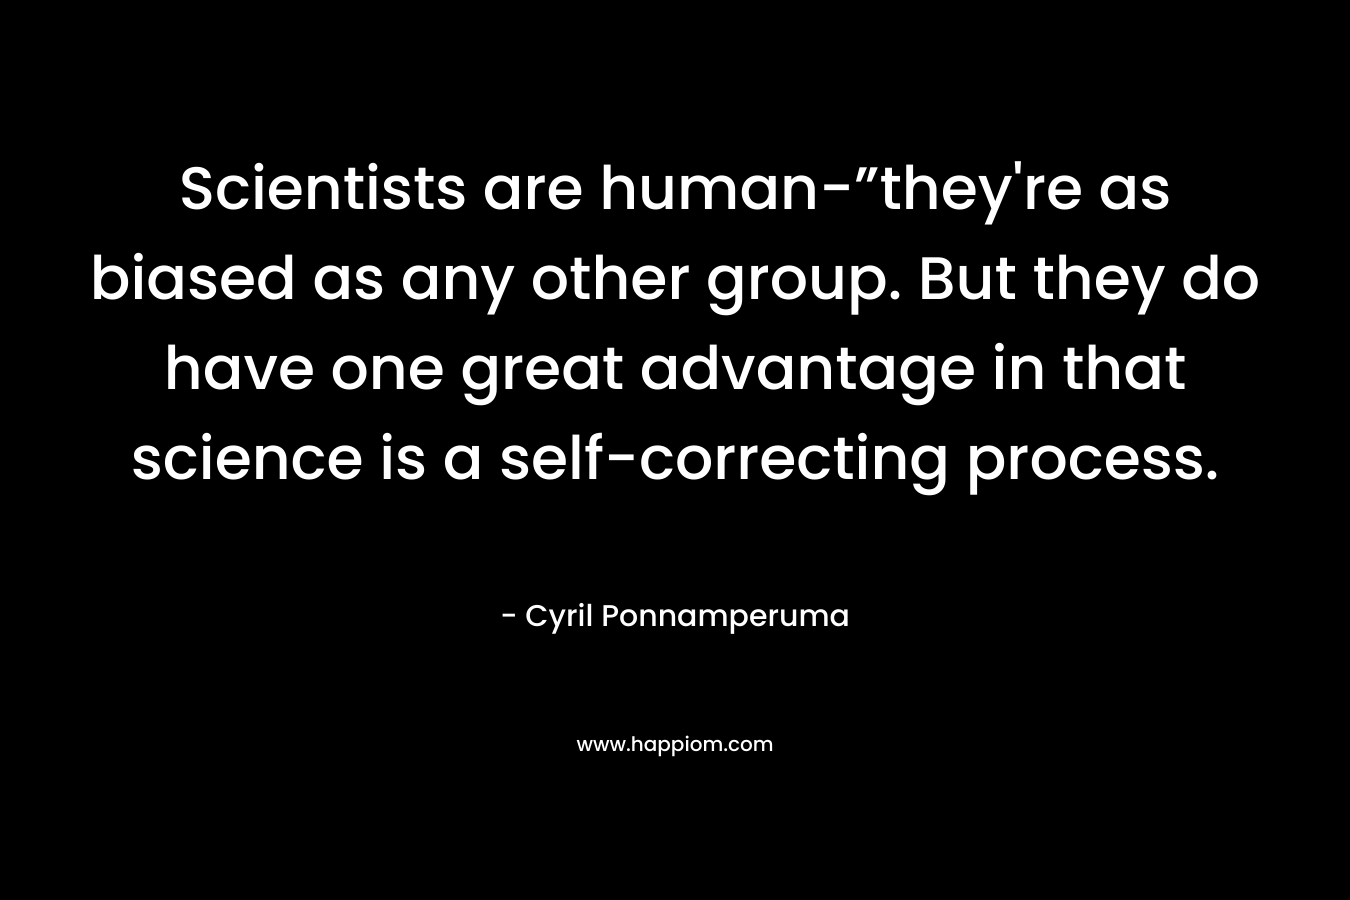 Scientists are human-”they’re as biased as any other group. But they do have one great advantage in that science is a self-correcting process. – Cyril Ponnamperuma